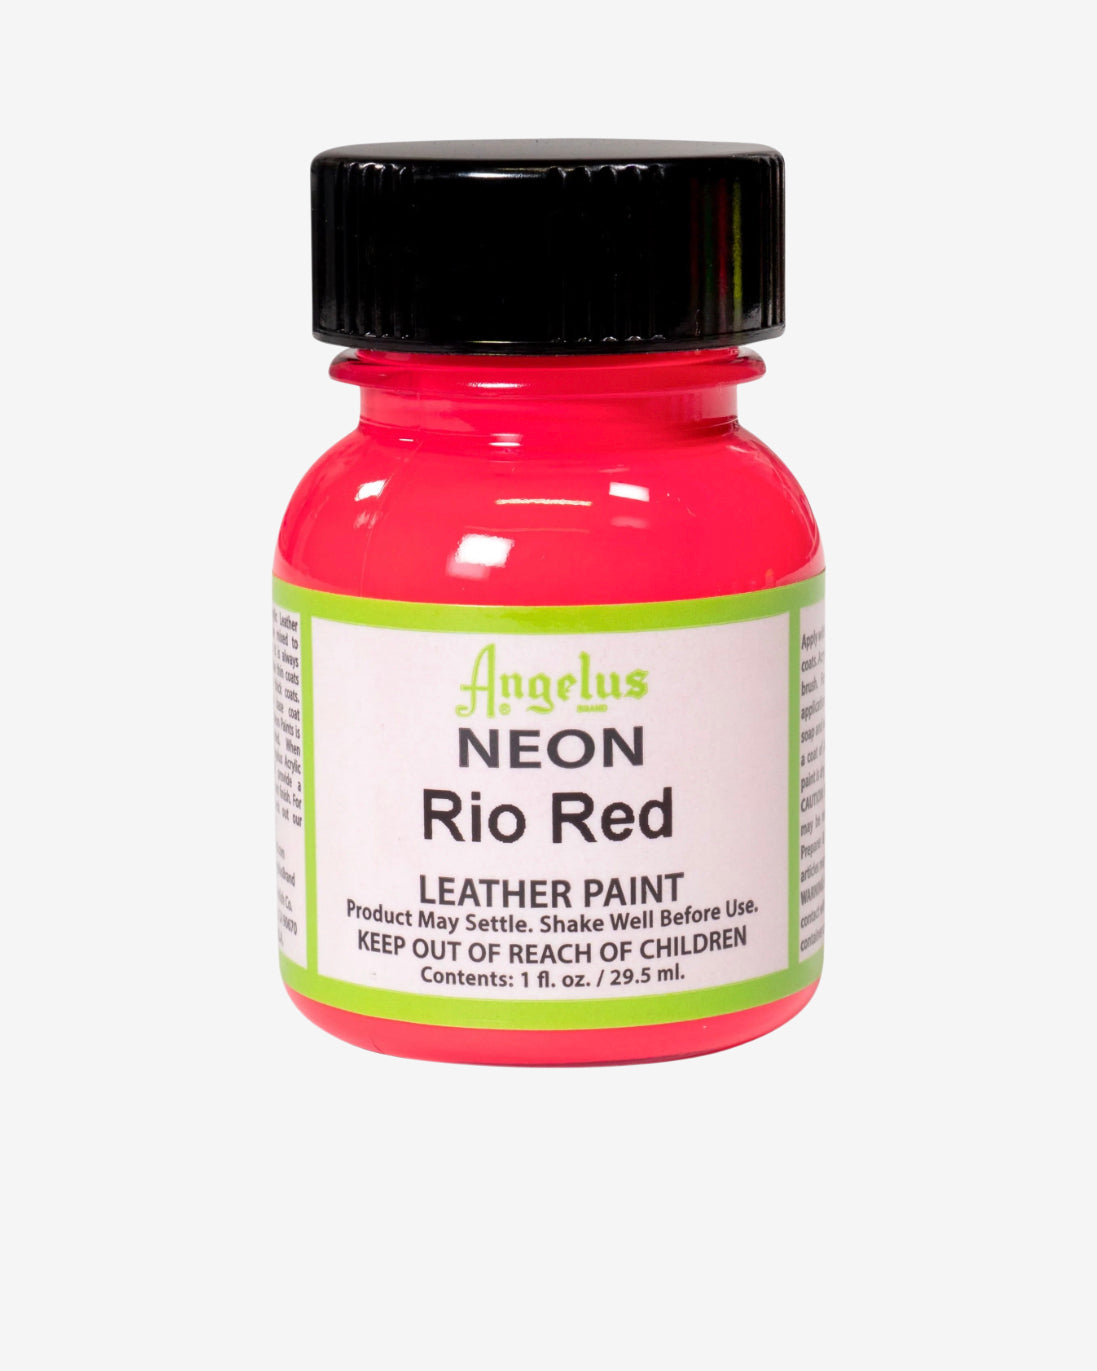 NEON LEATHER PAINT - RIO RED